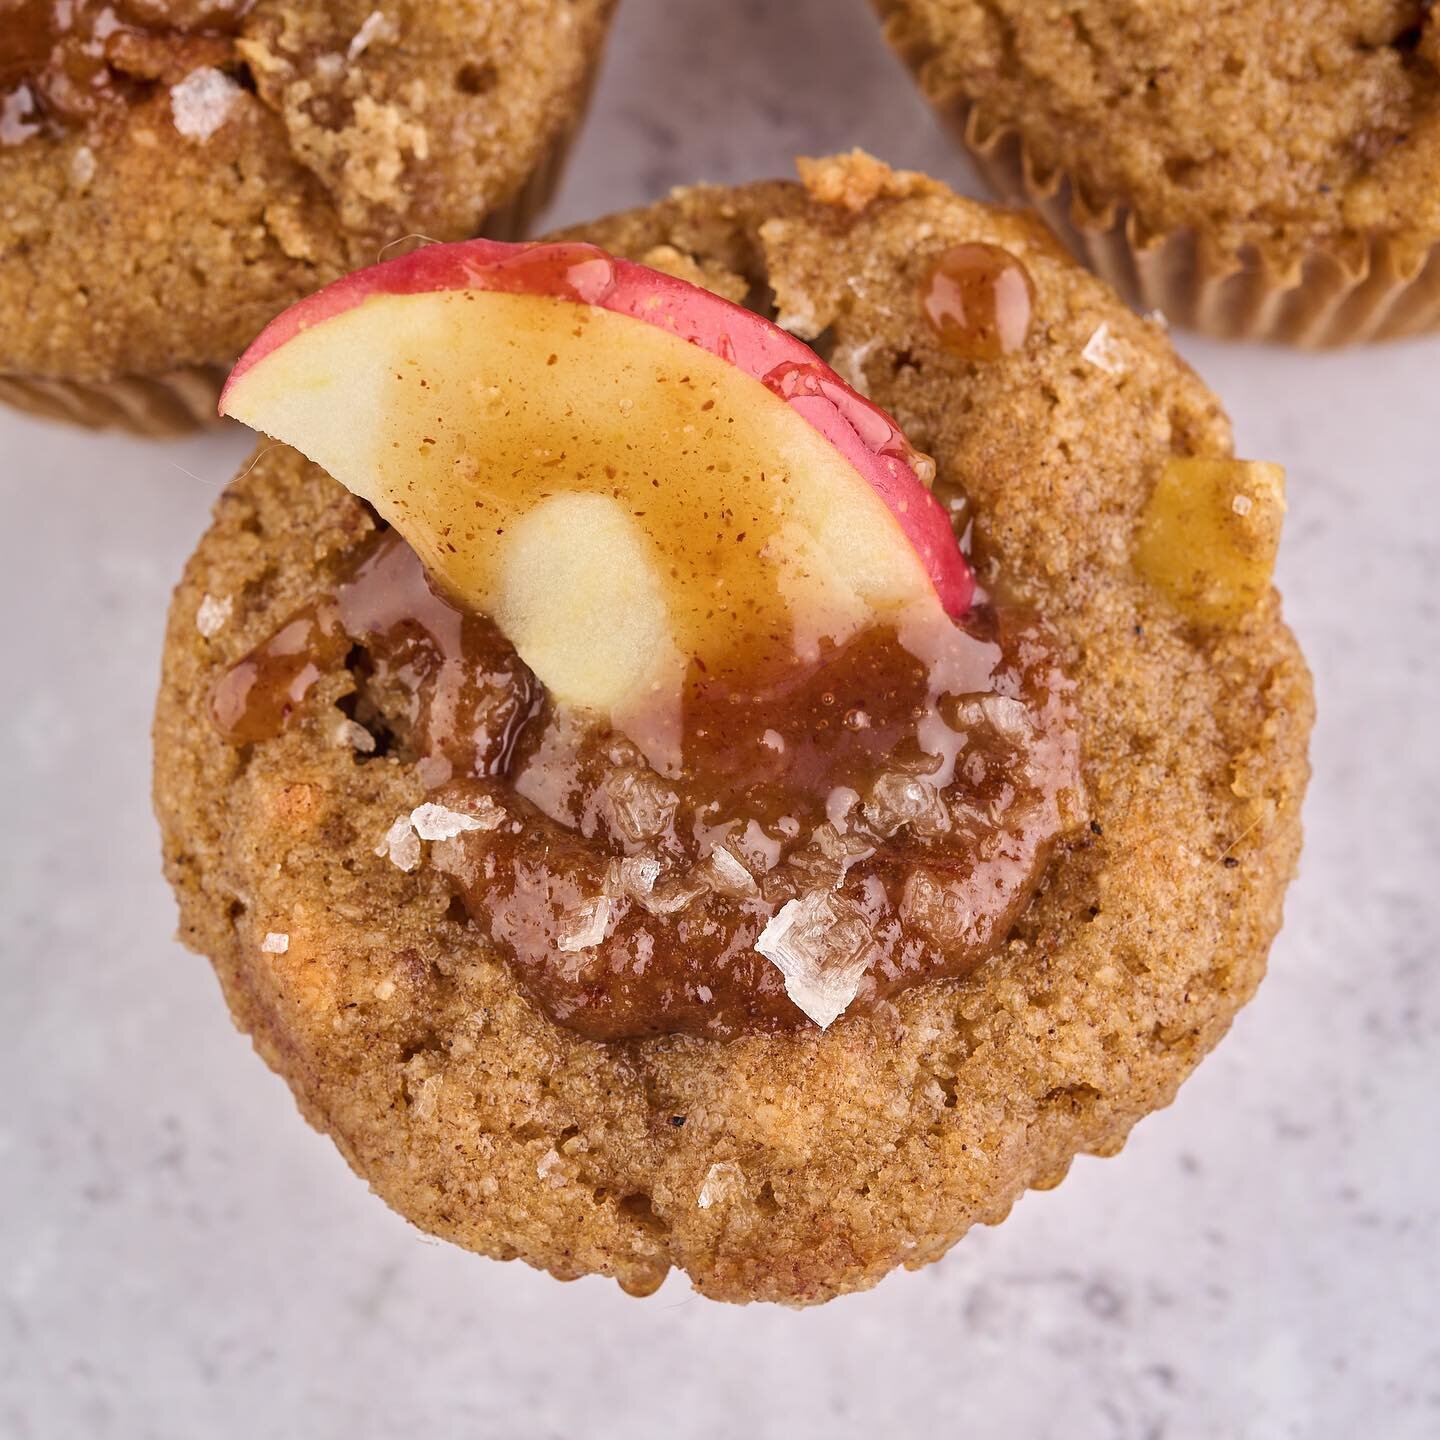 EASY CARAMEL APPLE BABYCAKES🤩
*swipe photos to my recipes

Imagine fragrant, sweet Caramel Apples! With just a few, easy pantry ingredients you can make these pillowy, delicious cakes. 👩🏻&zwj;🍳My recipe bakes up fluffy and moist by using almond f